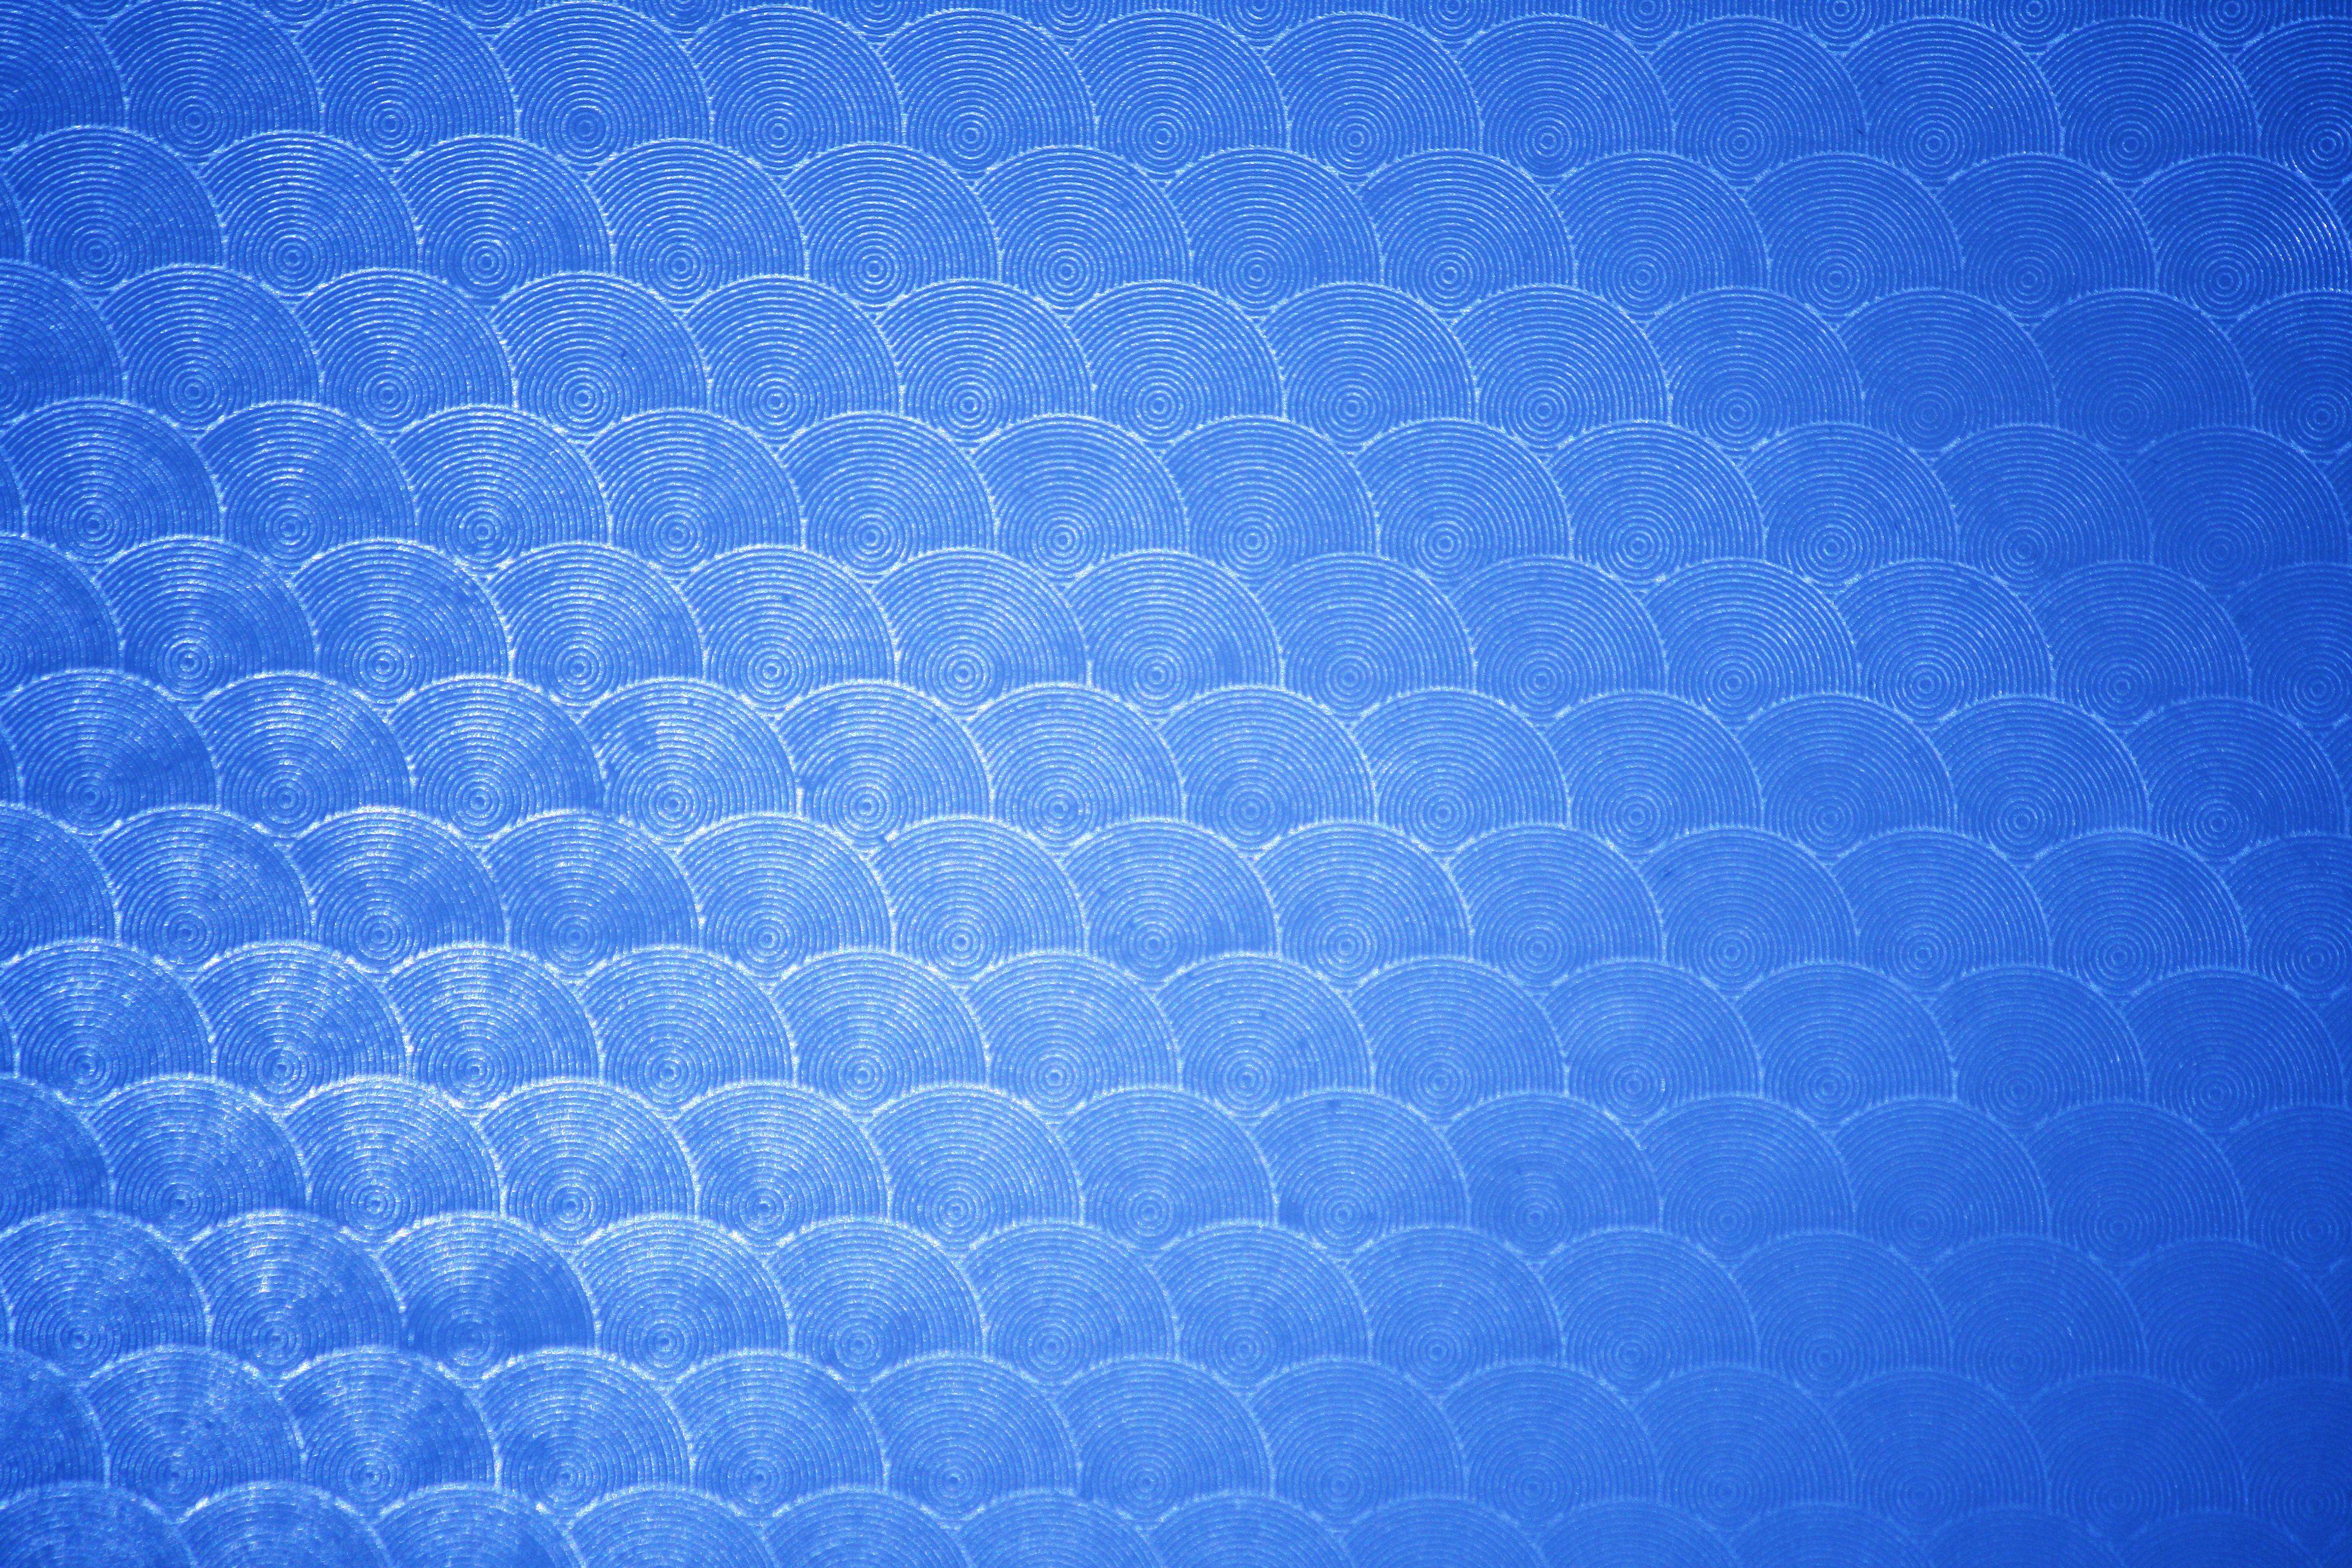 Sky Blue Circle Patterned Plastic Texture Picture. Free Photograph